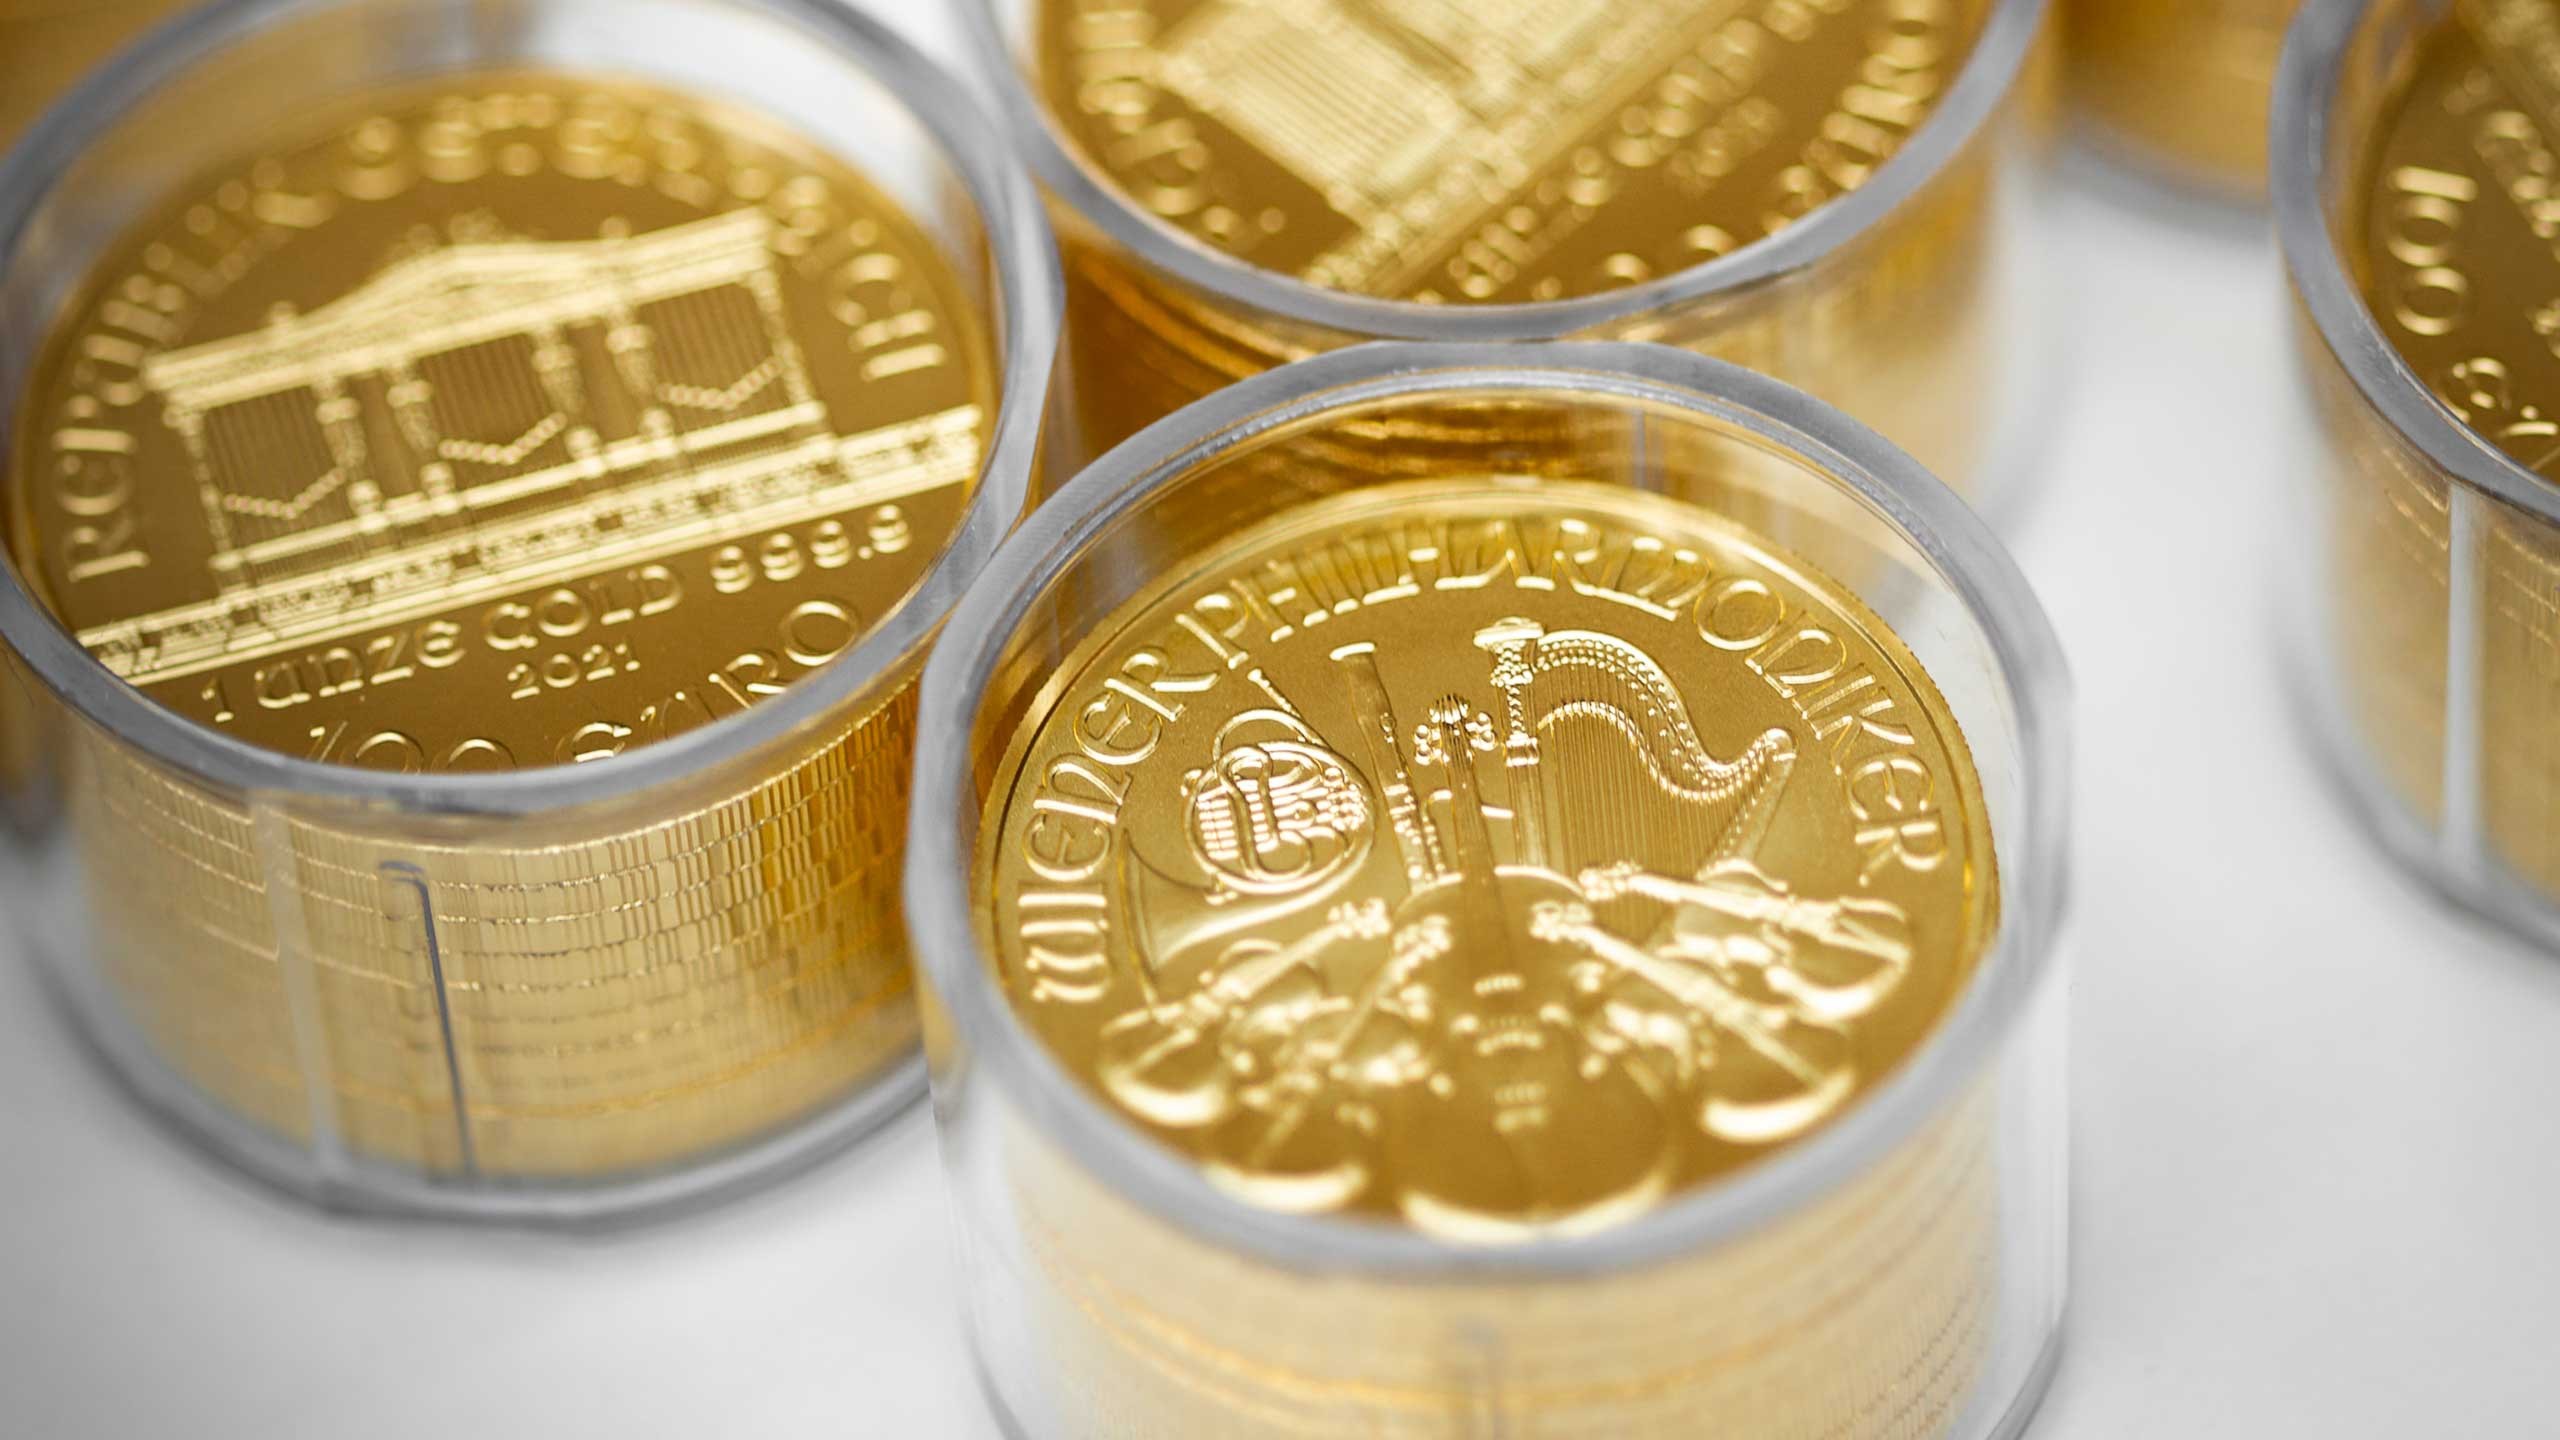 Vienna Philharmonic Gold Coins in Tubes